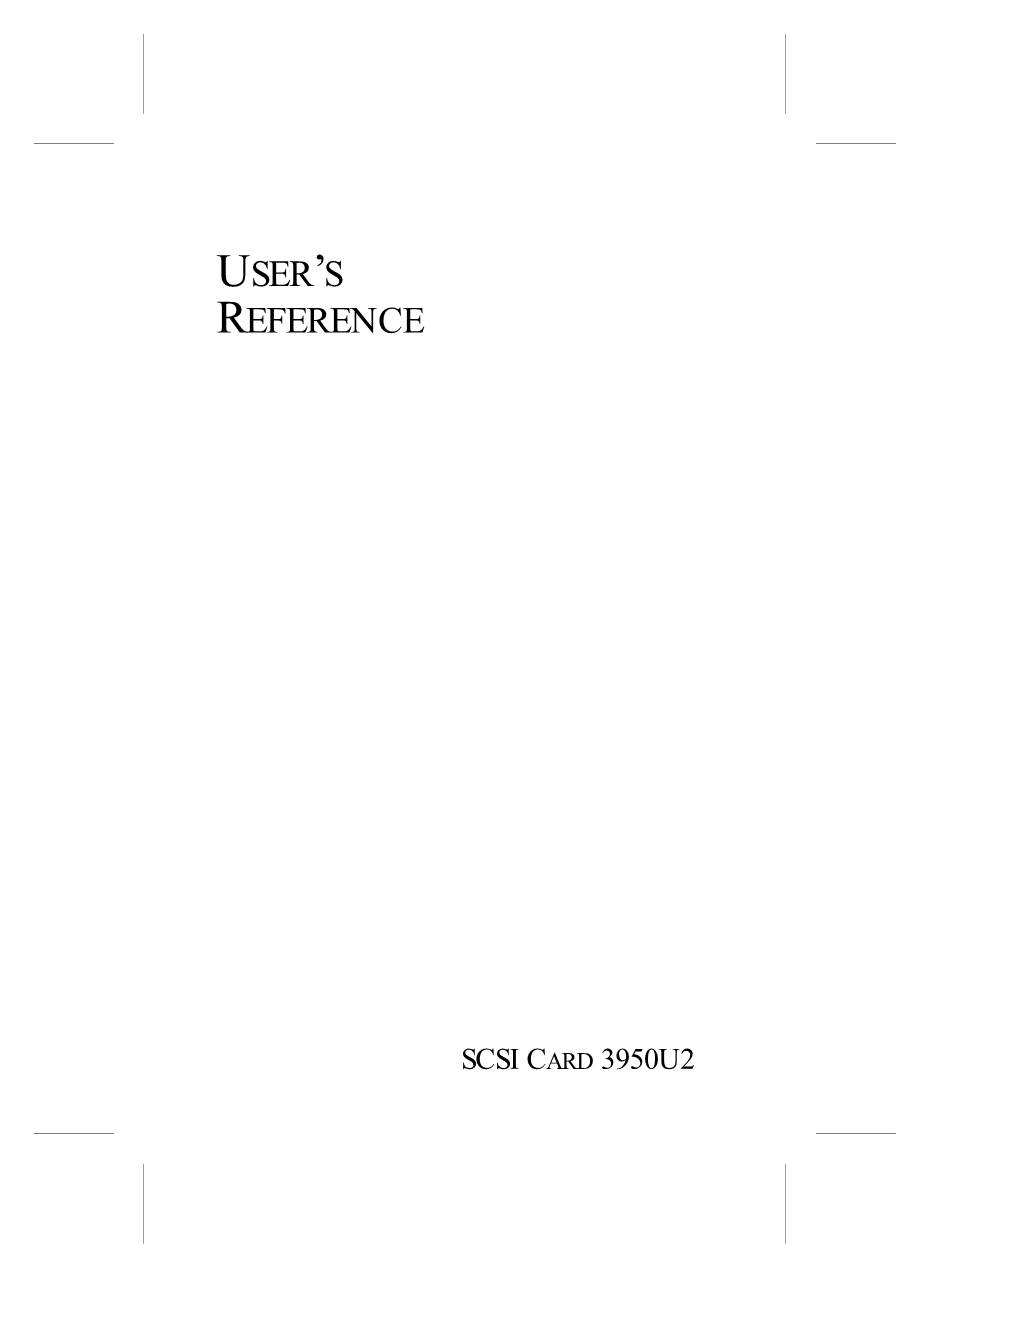 User's Reference